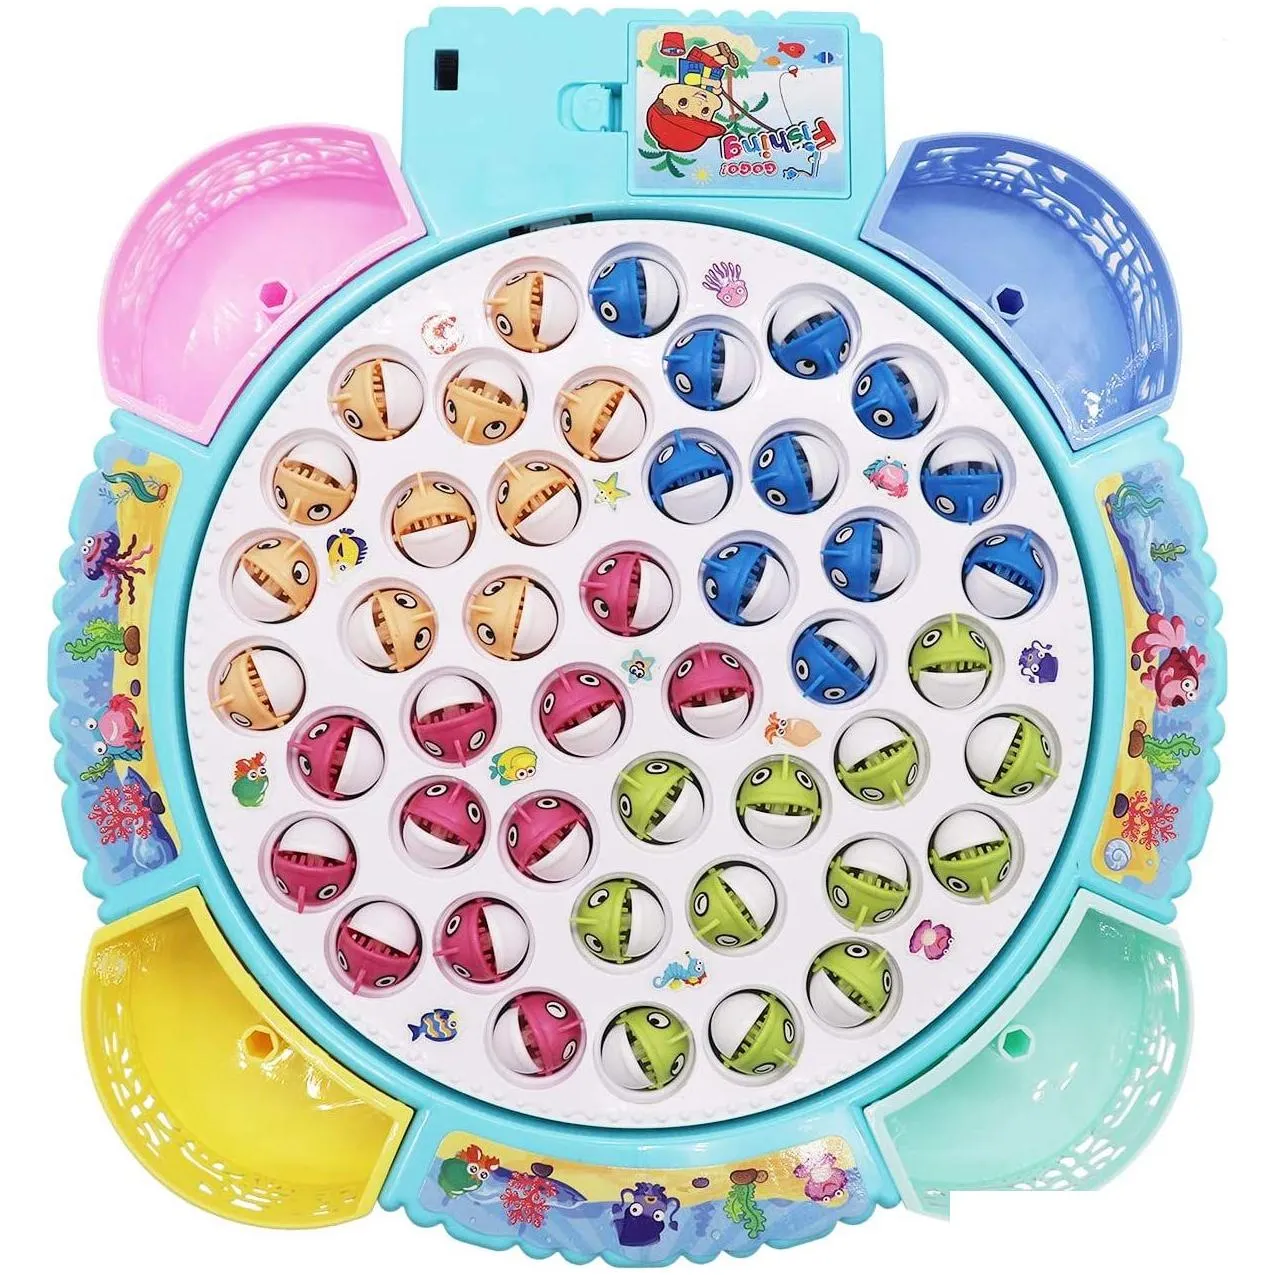 intelligent toys bo fishing game toy rod board rotating with music includes 45 fishs and 4 fishing poles fine motor skill training